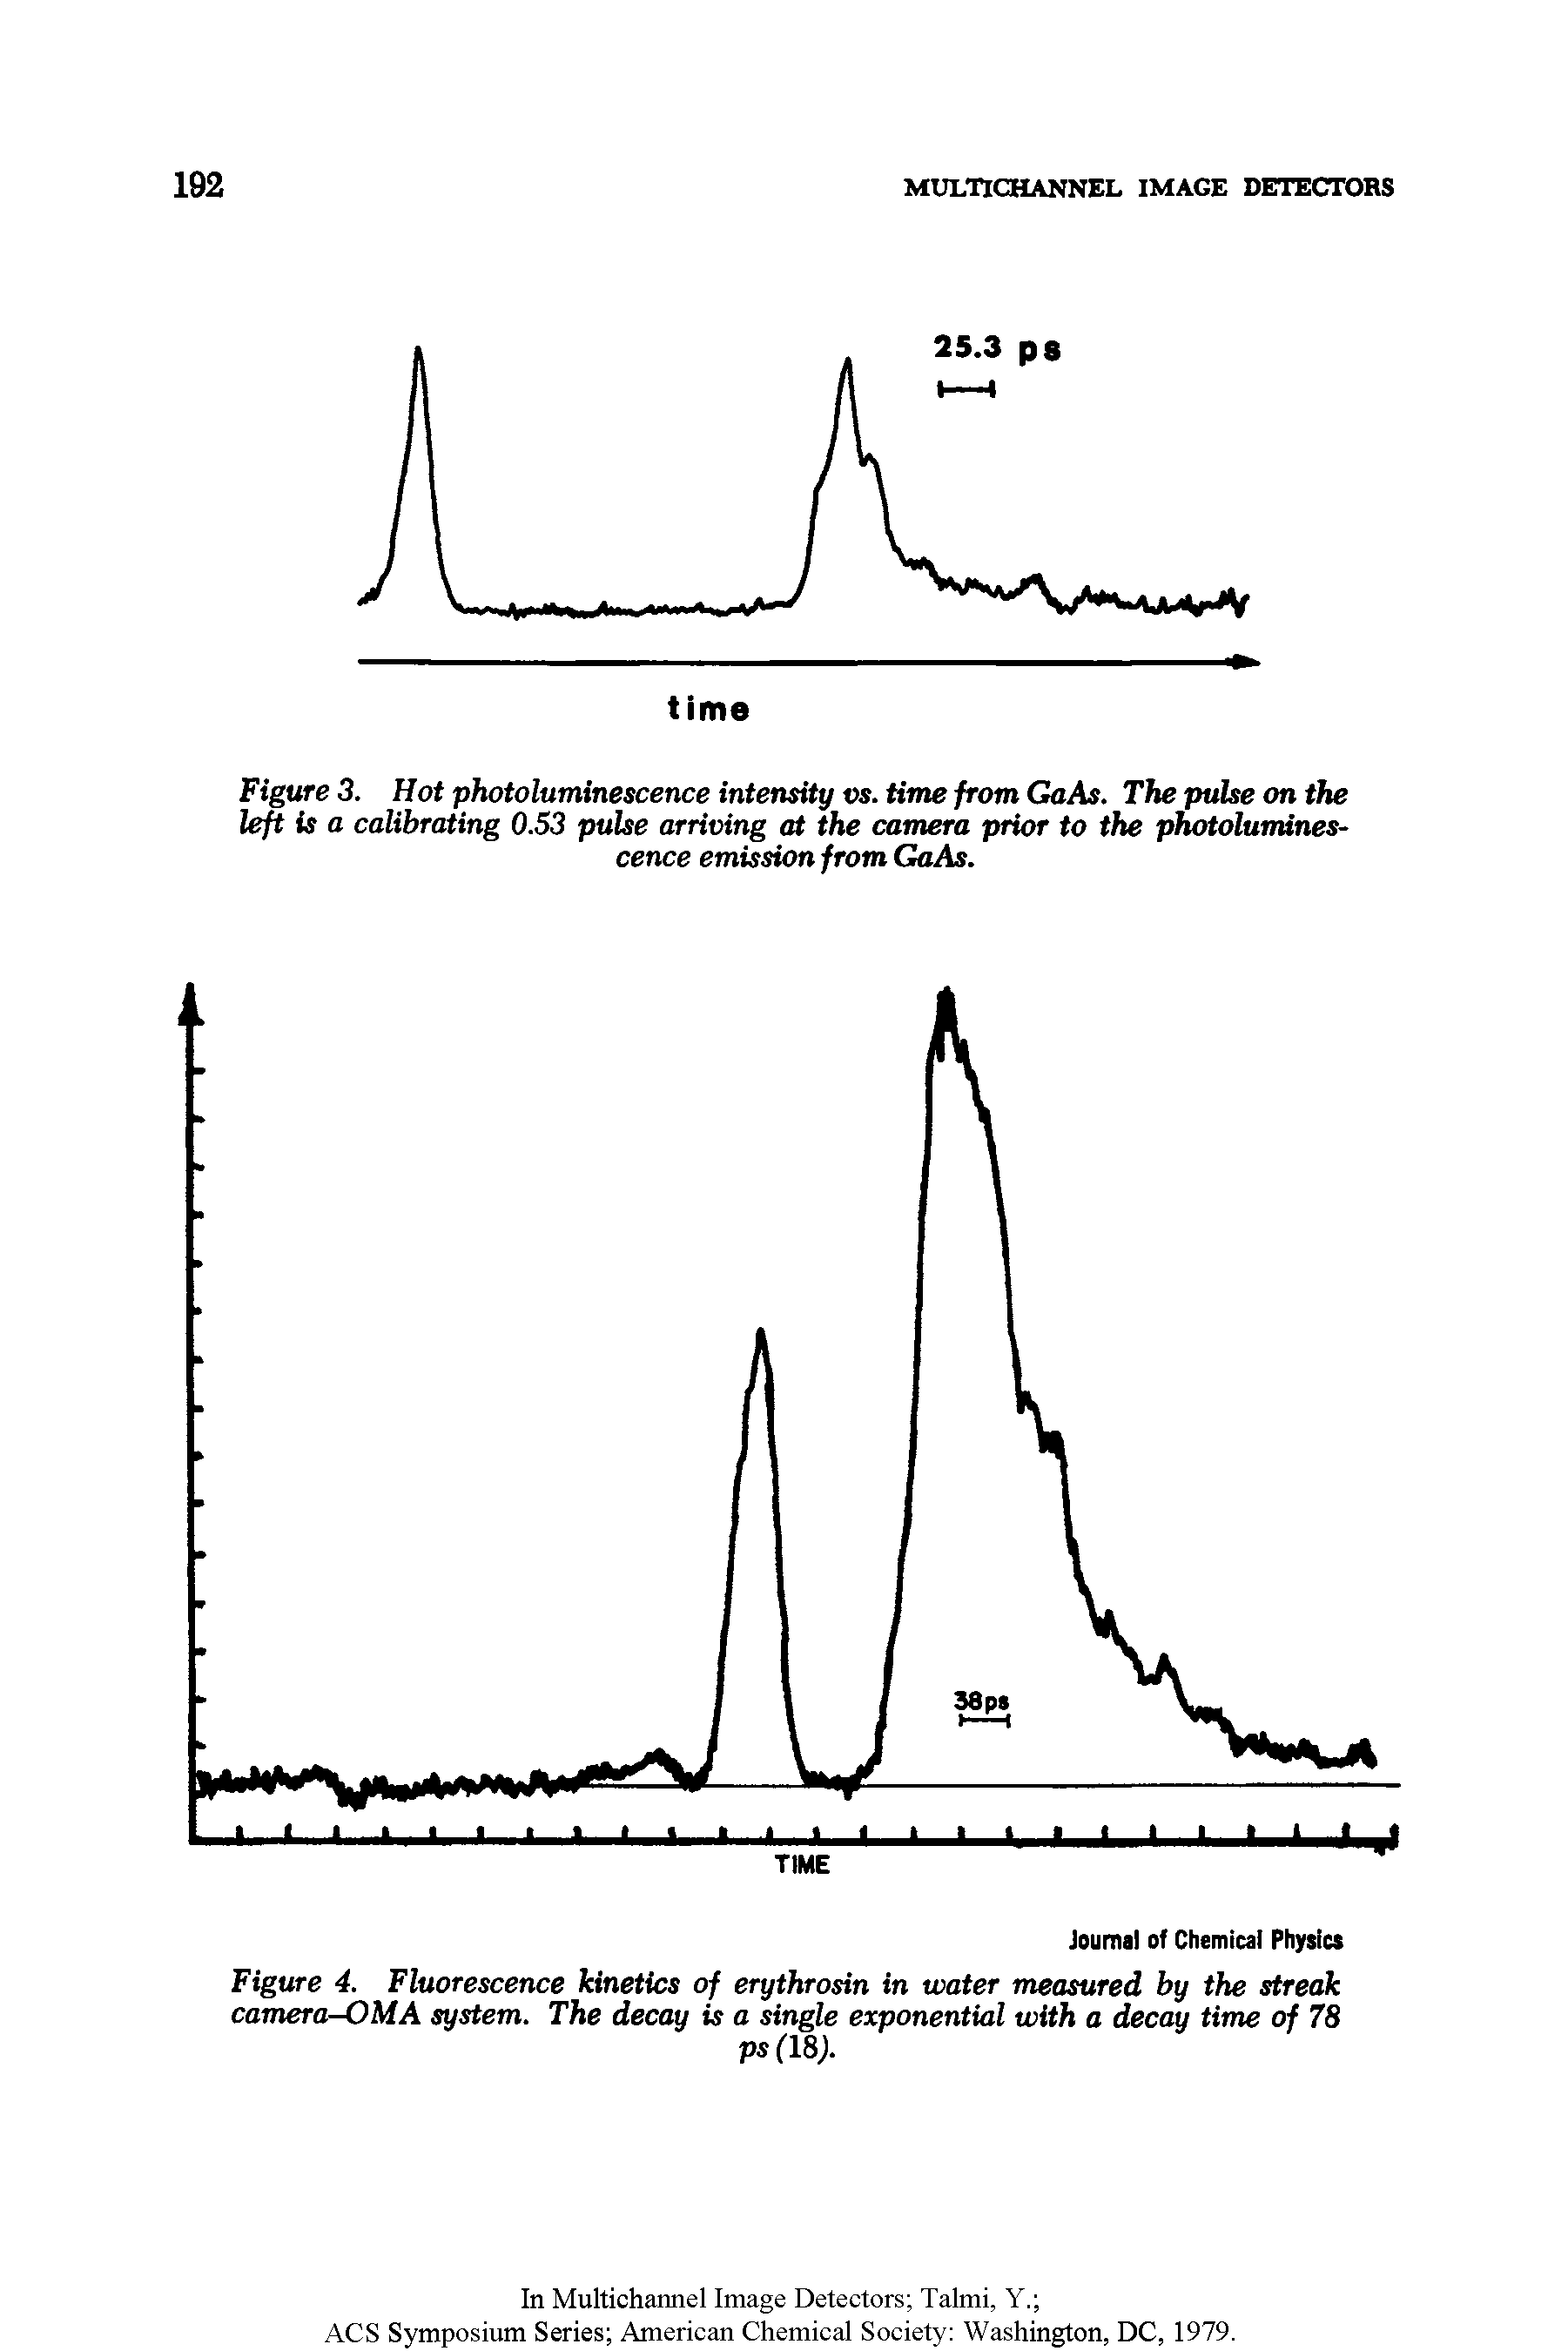 Figure 3. Hot photoluminescence intensity vs. time from GaAs. The pulse on the left is a calibrating 0.53 pulse arriving at the camera prior to the photoluminescence emission from GaAs.